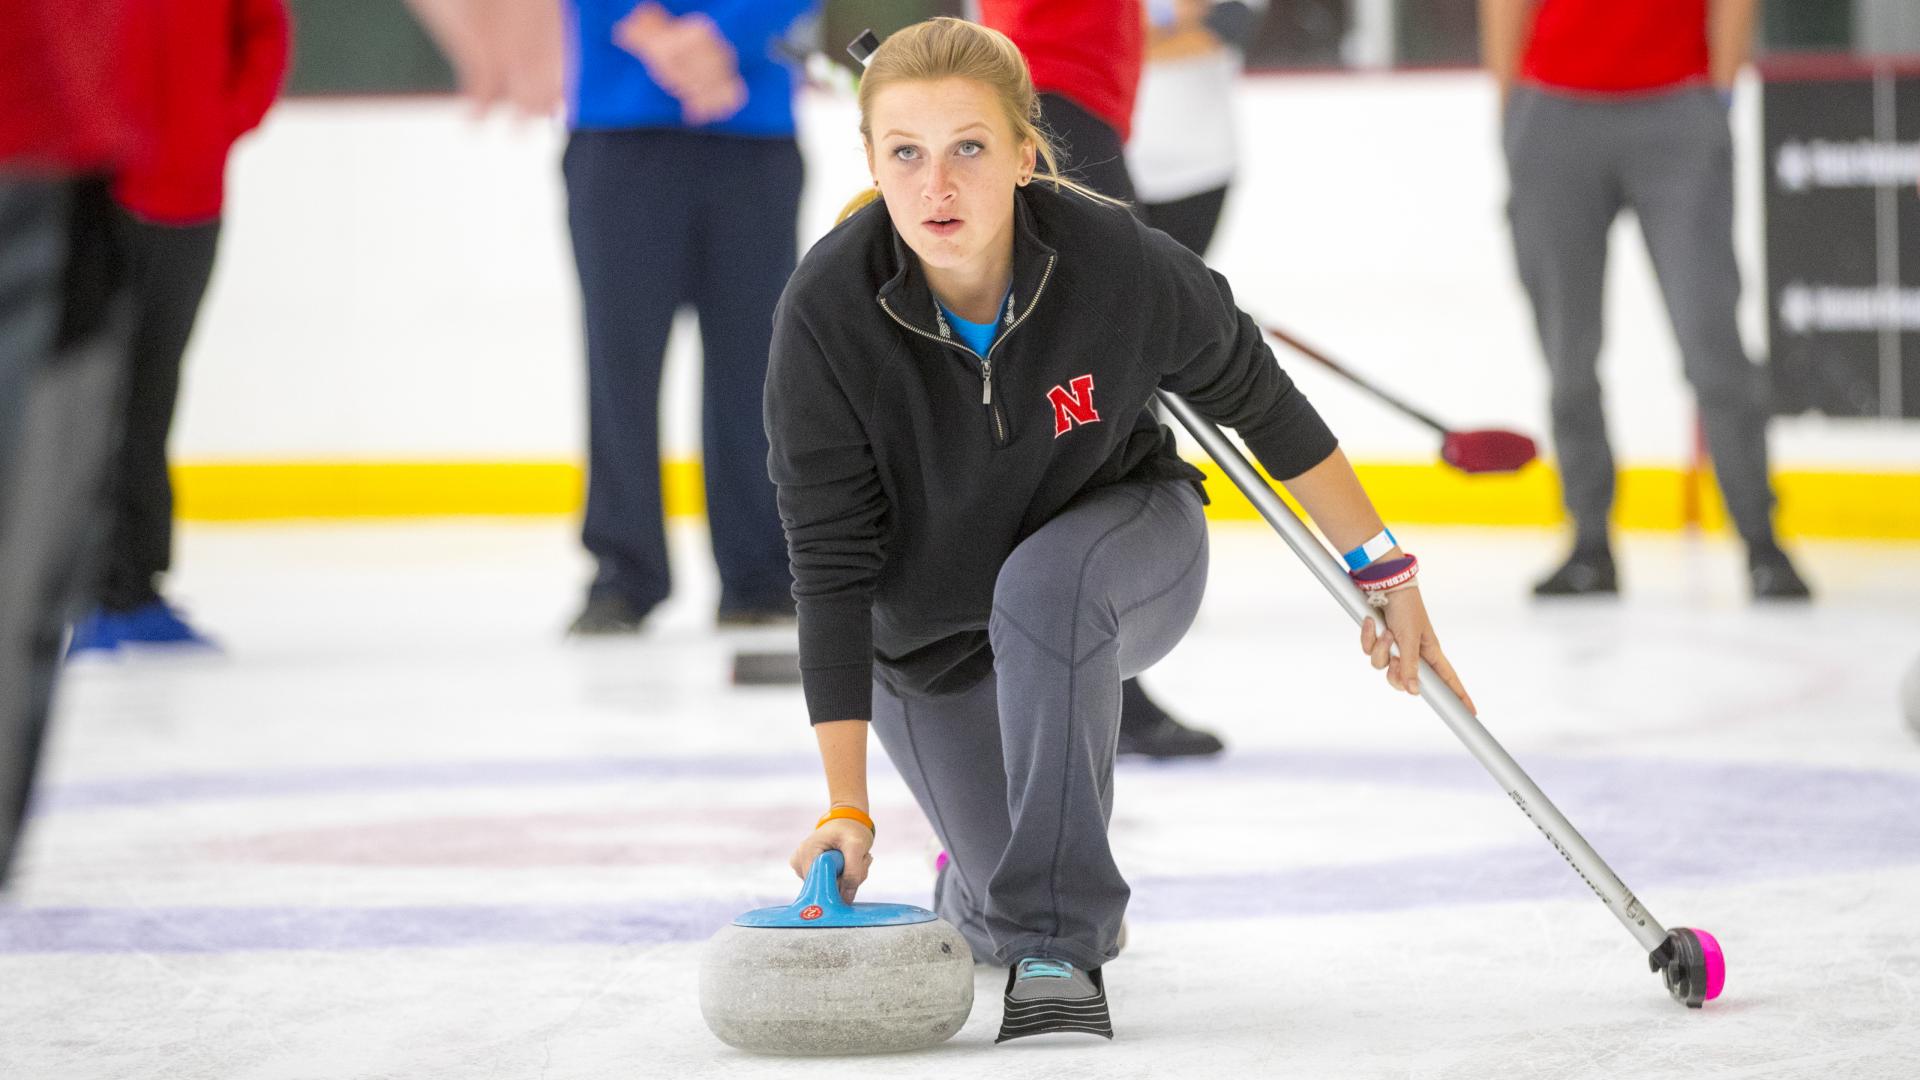 A member of the Nebraska Curling Club practices at the Breslow Ice Center.